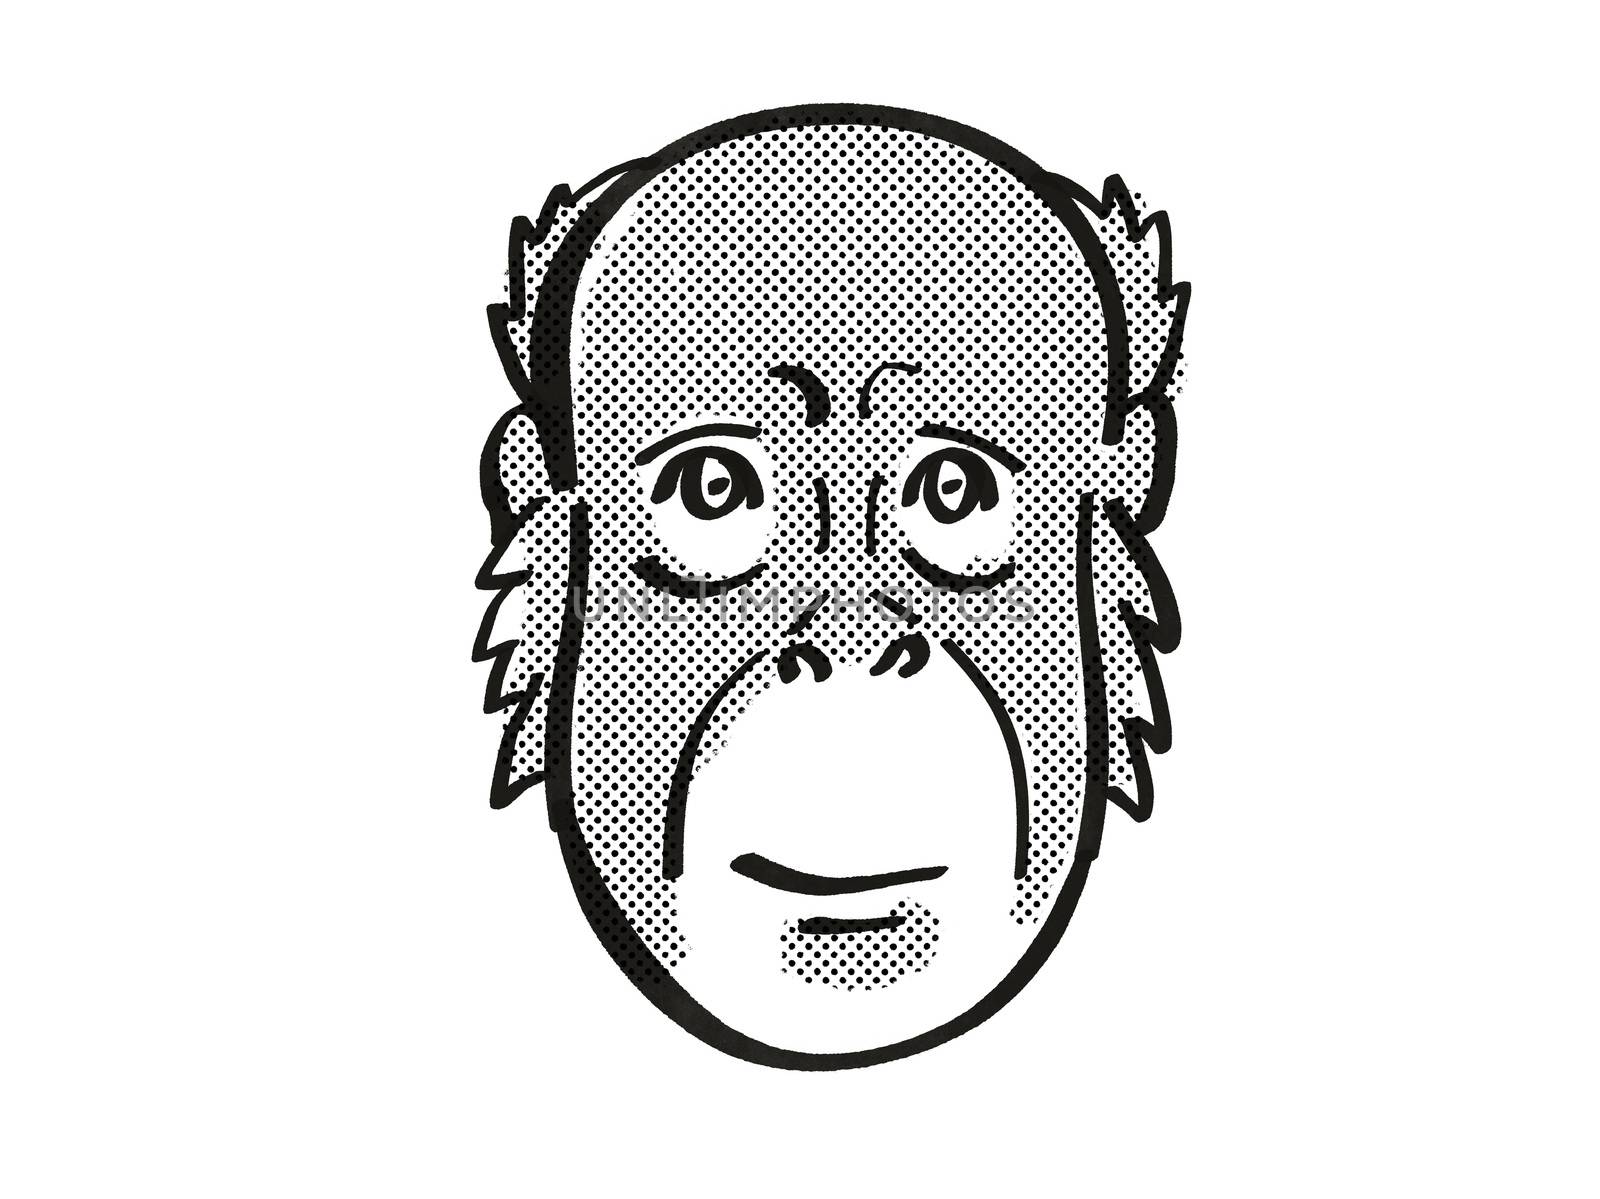 Retro cartoon mono line style drawing of head of a Bornean Orang-utan also known as the Red Ape, an endangered wildlife species on isolated white background done in black and white.